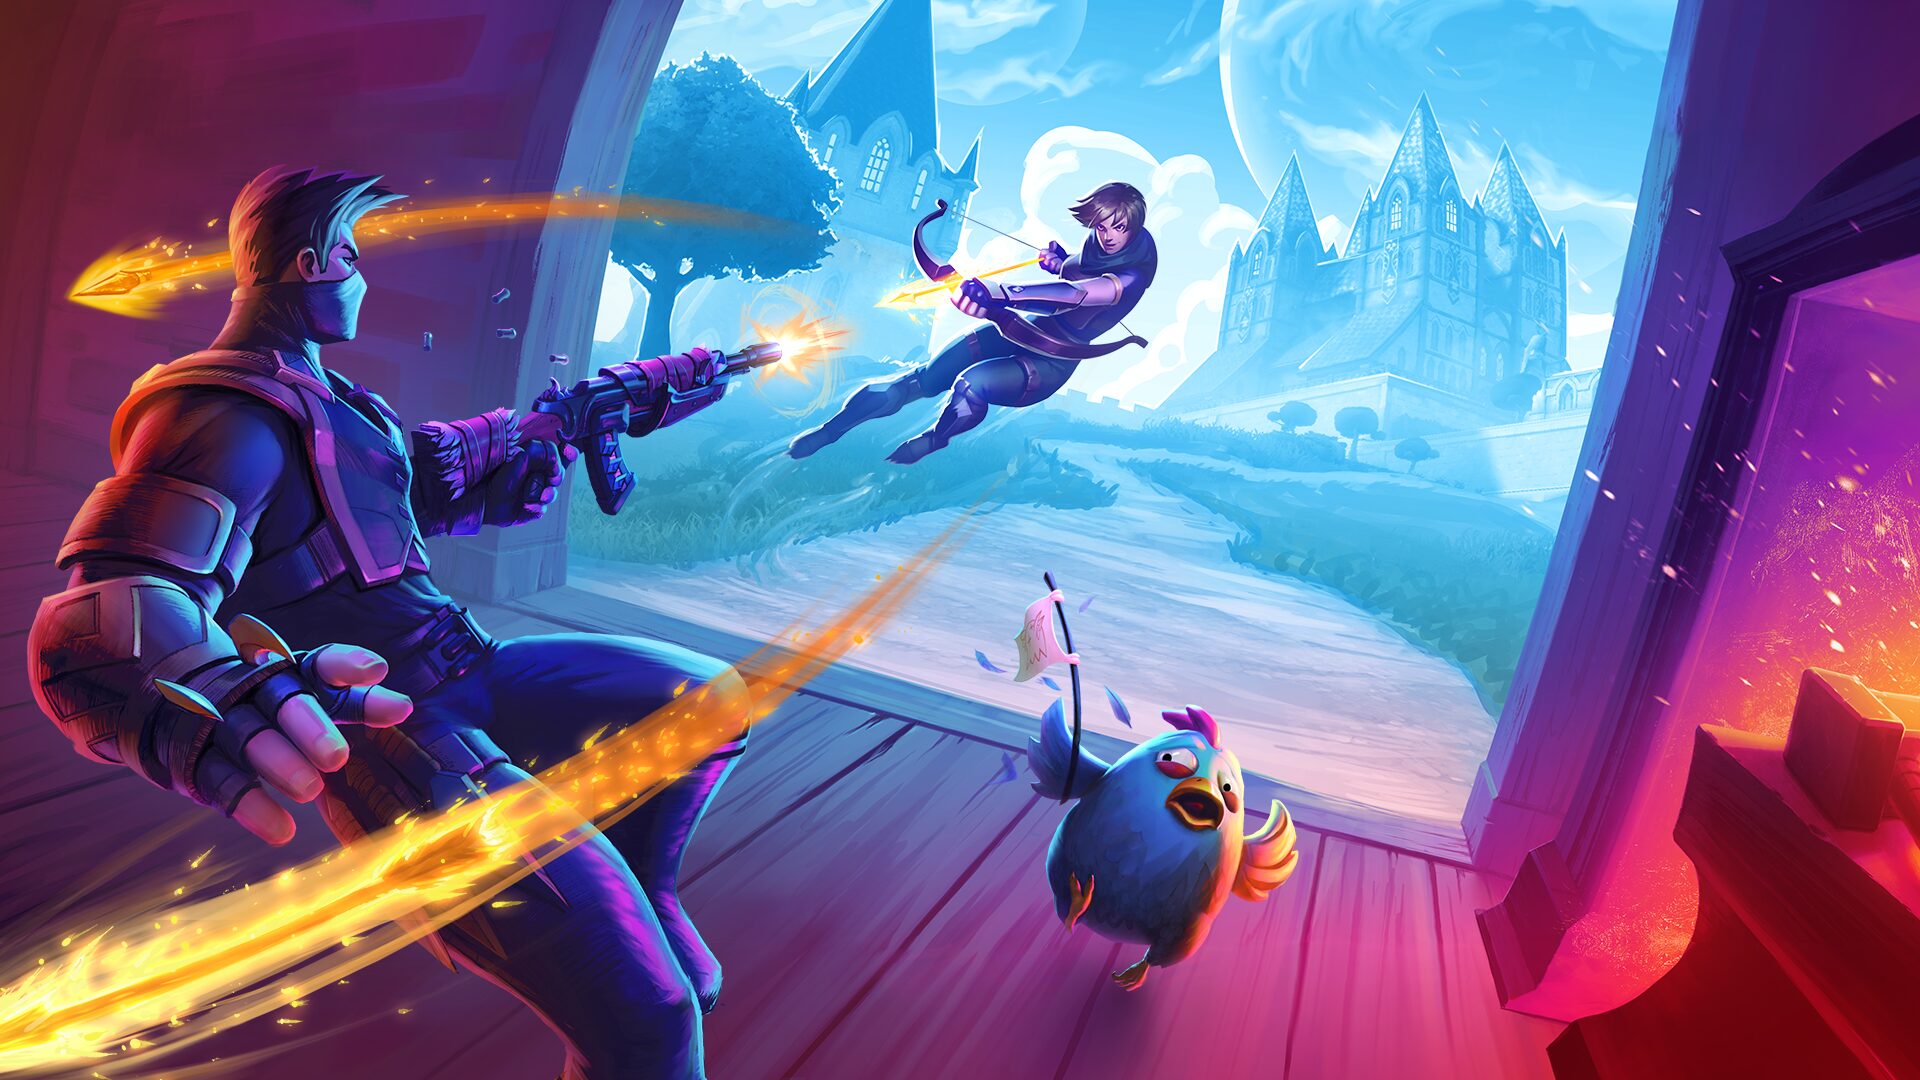 Realm Royale Founder's Pack